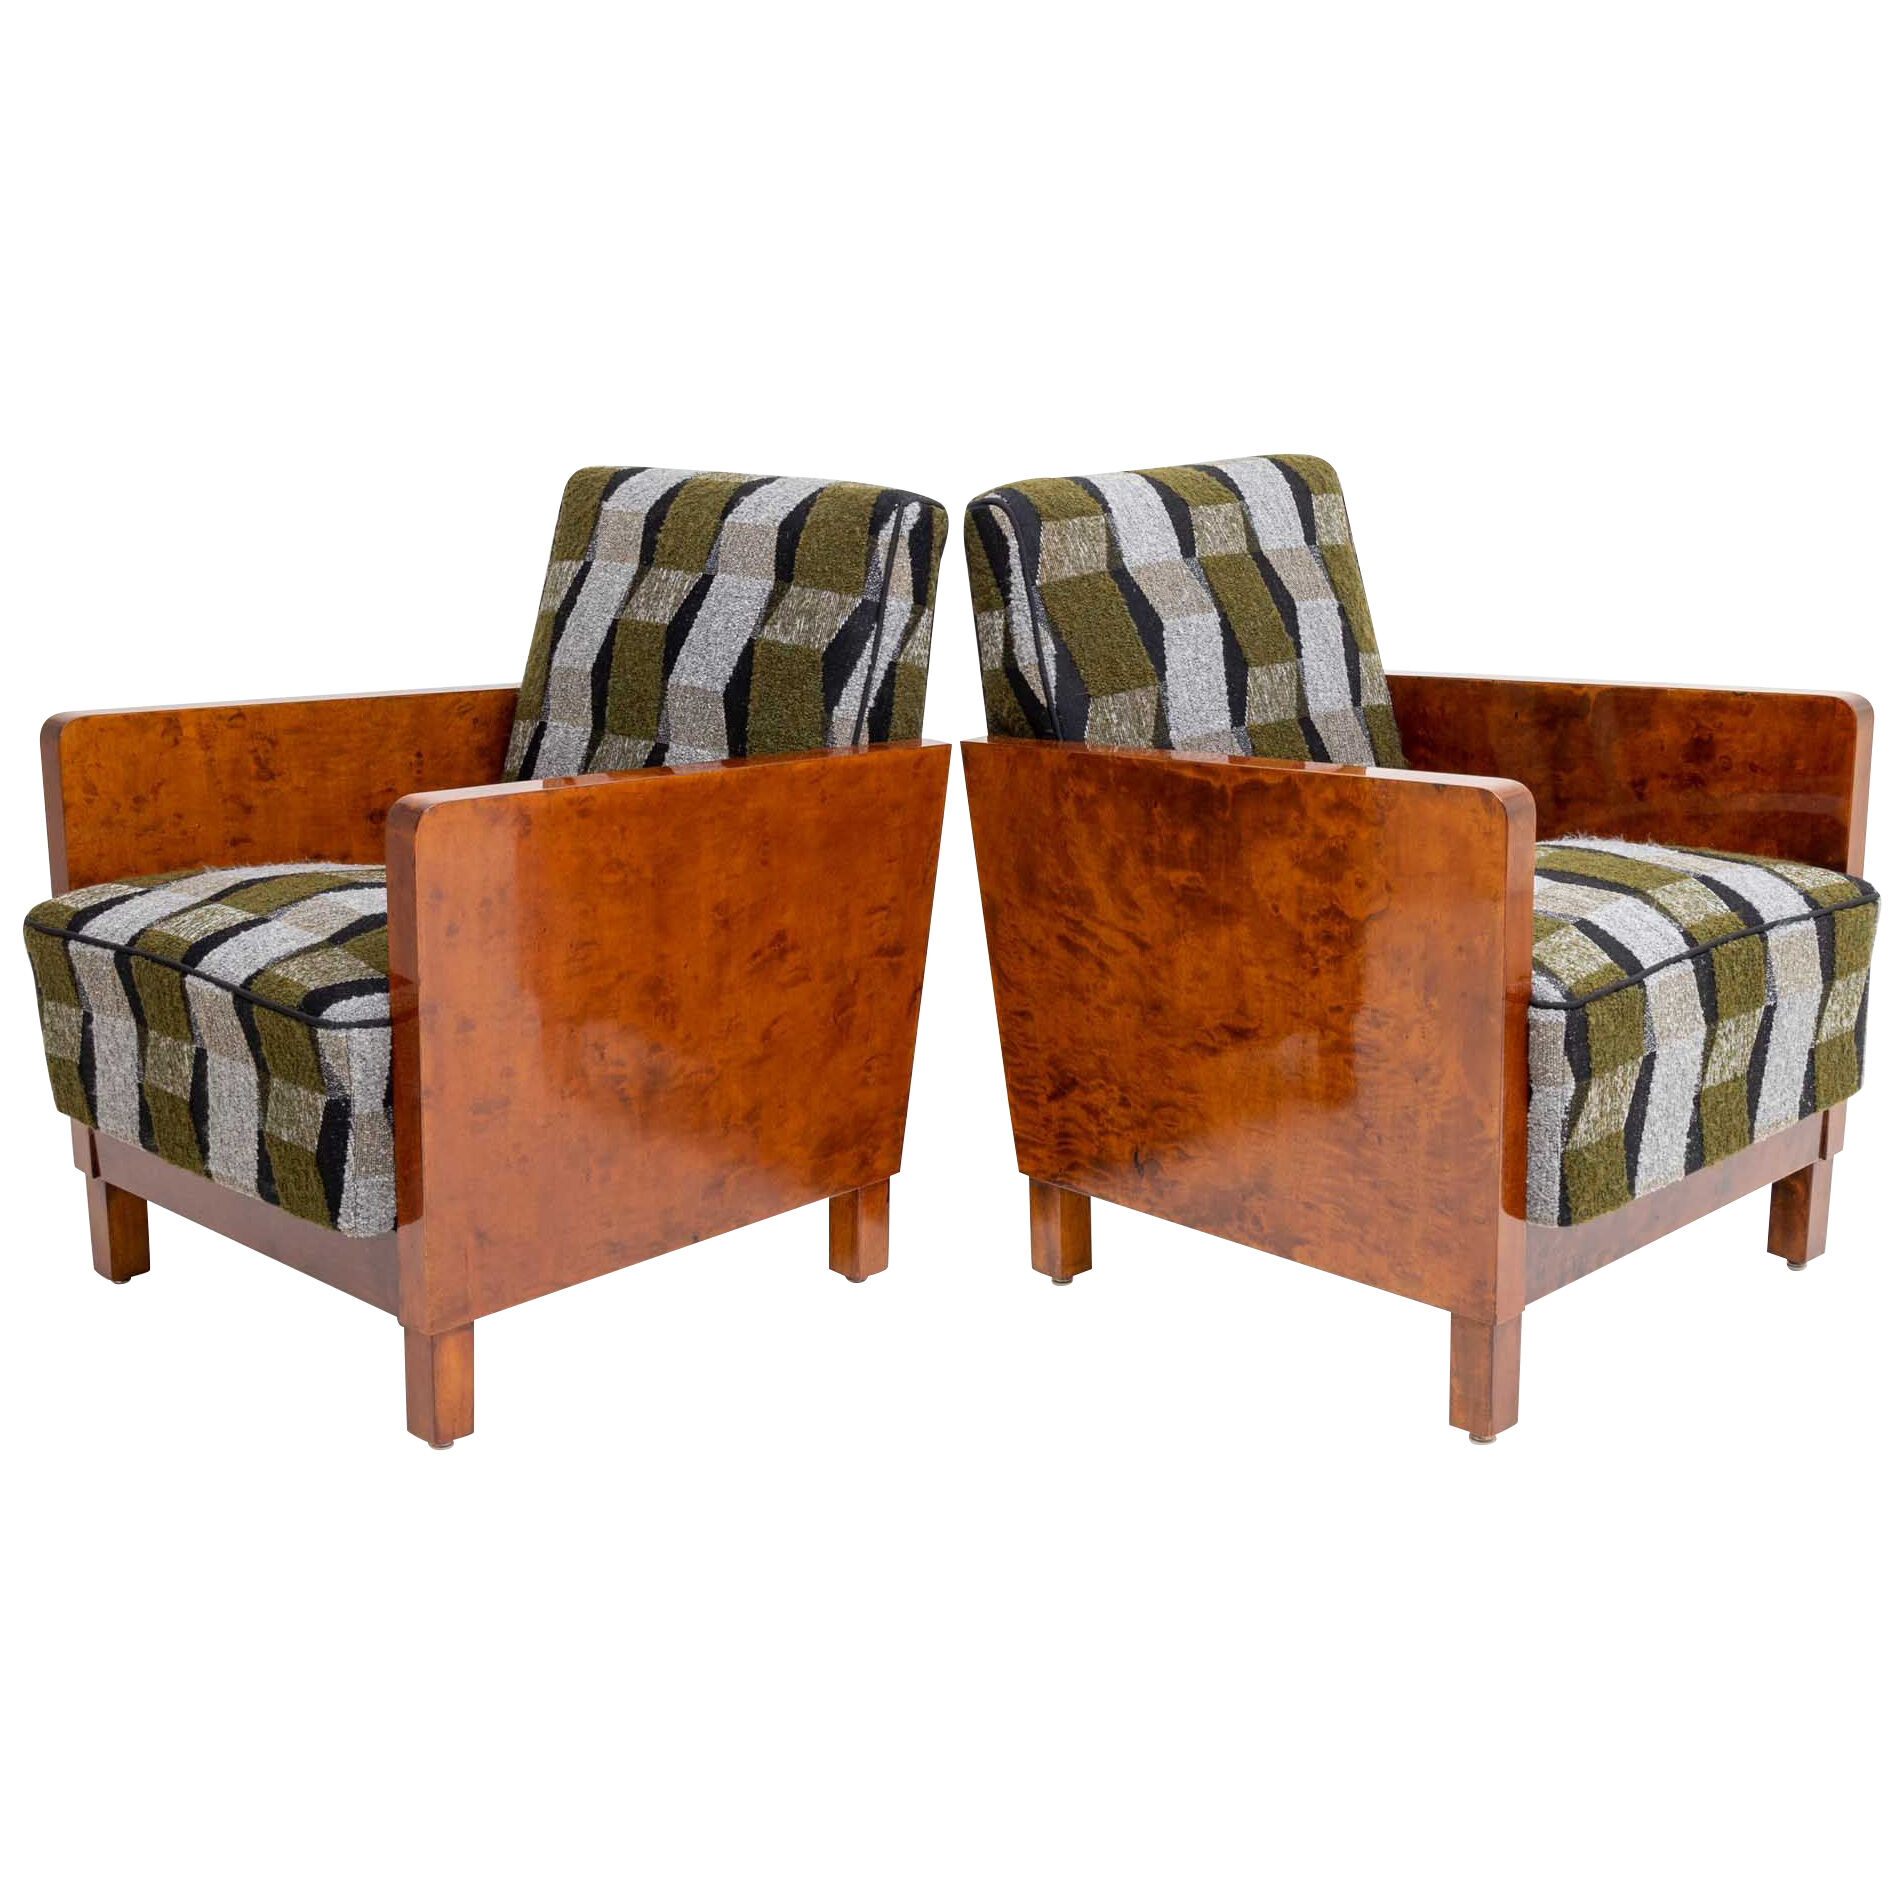 Art Deco Lounge Chairs, Sweden Circa 1920 - The Bruno Effect